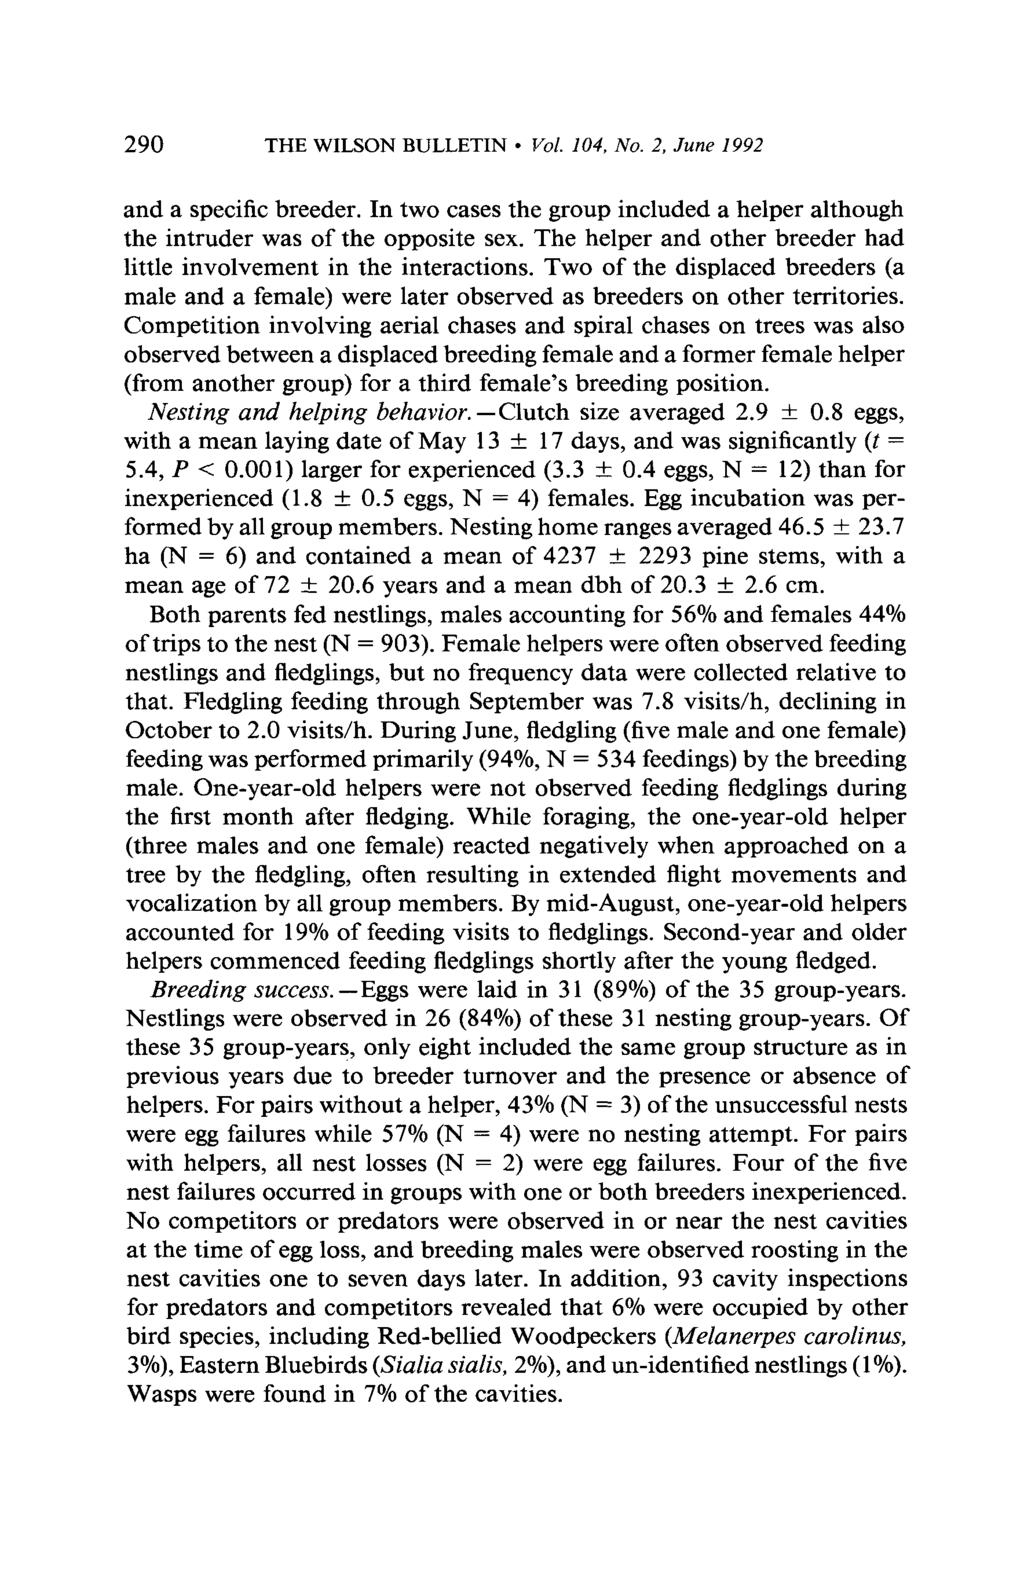 290 THE WILSON BULLETIN l Vol. 104, No. 2, June I992 and a specific breeder. In two cases the group included a helper although the intruder was of the opposite sex.